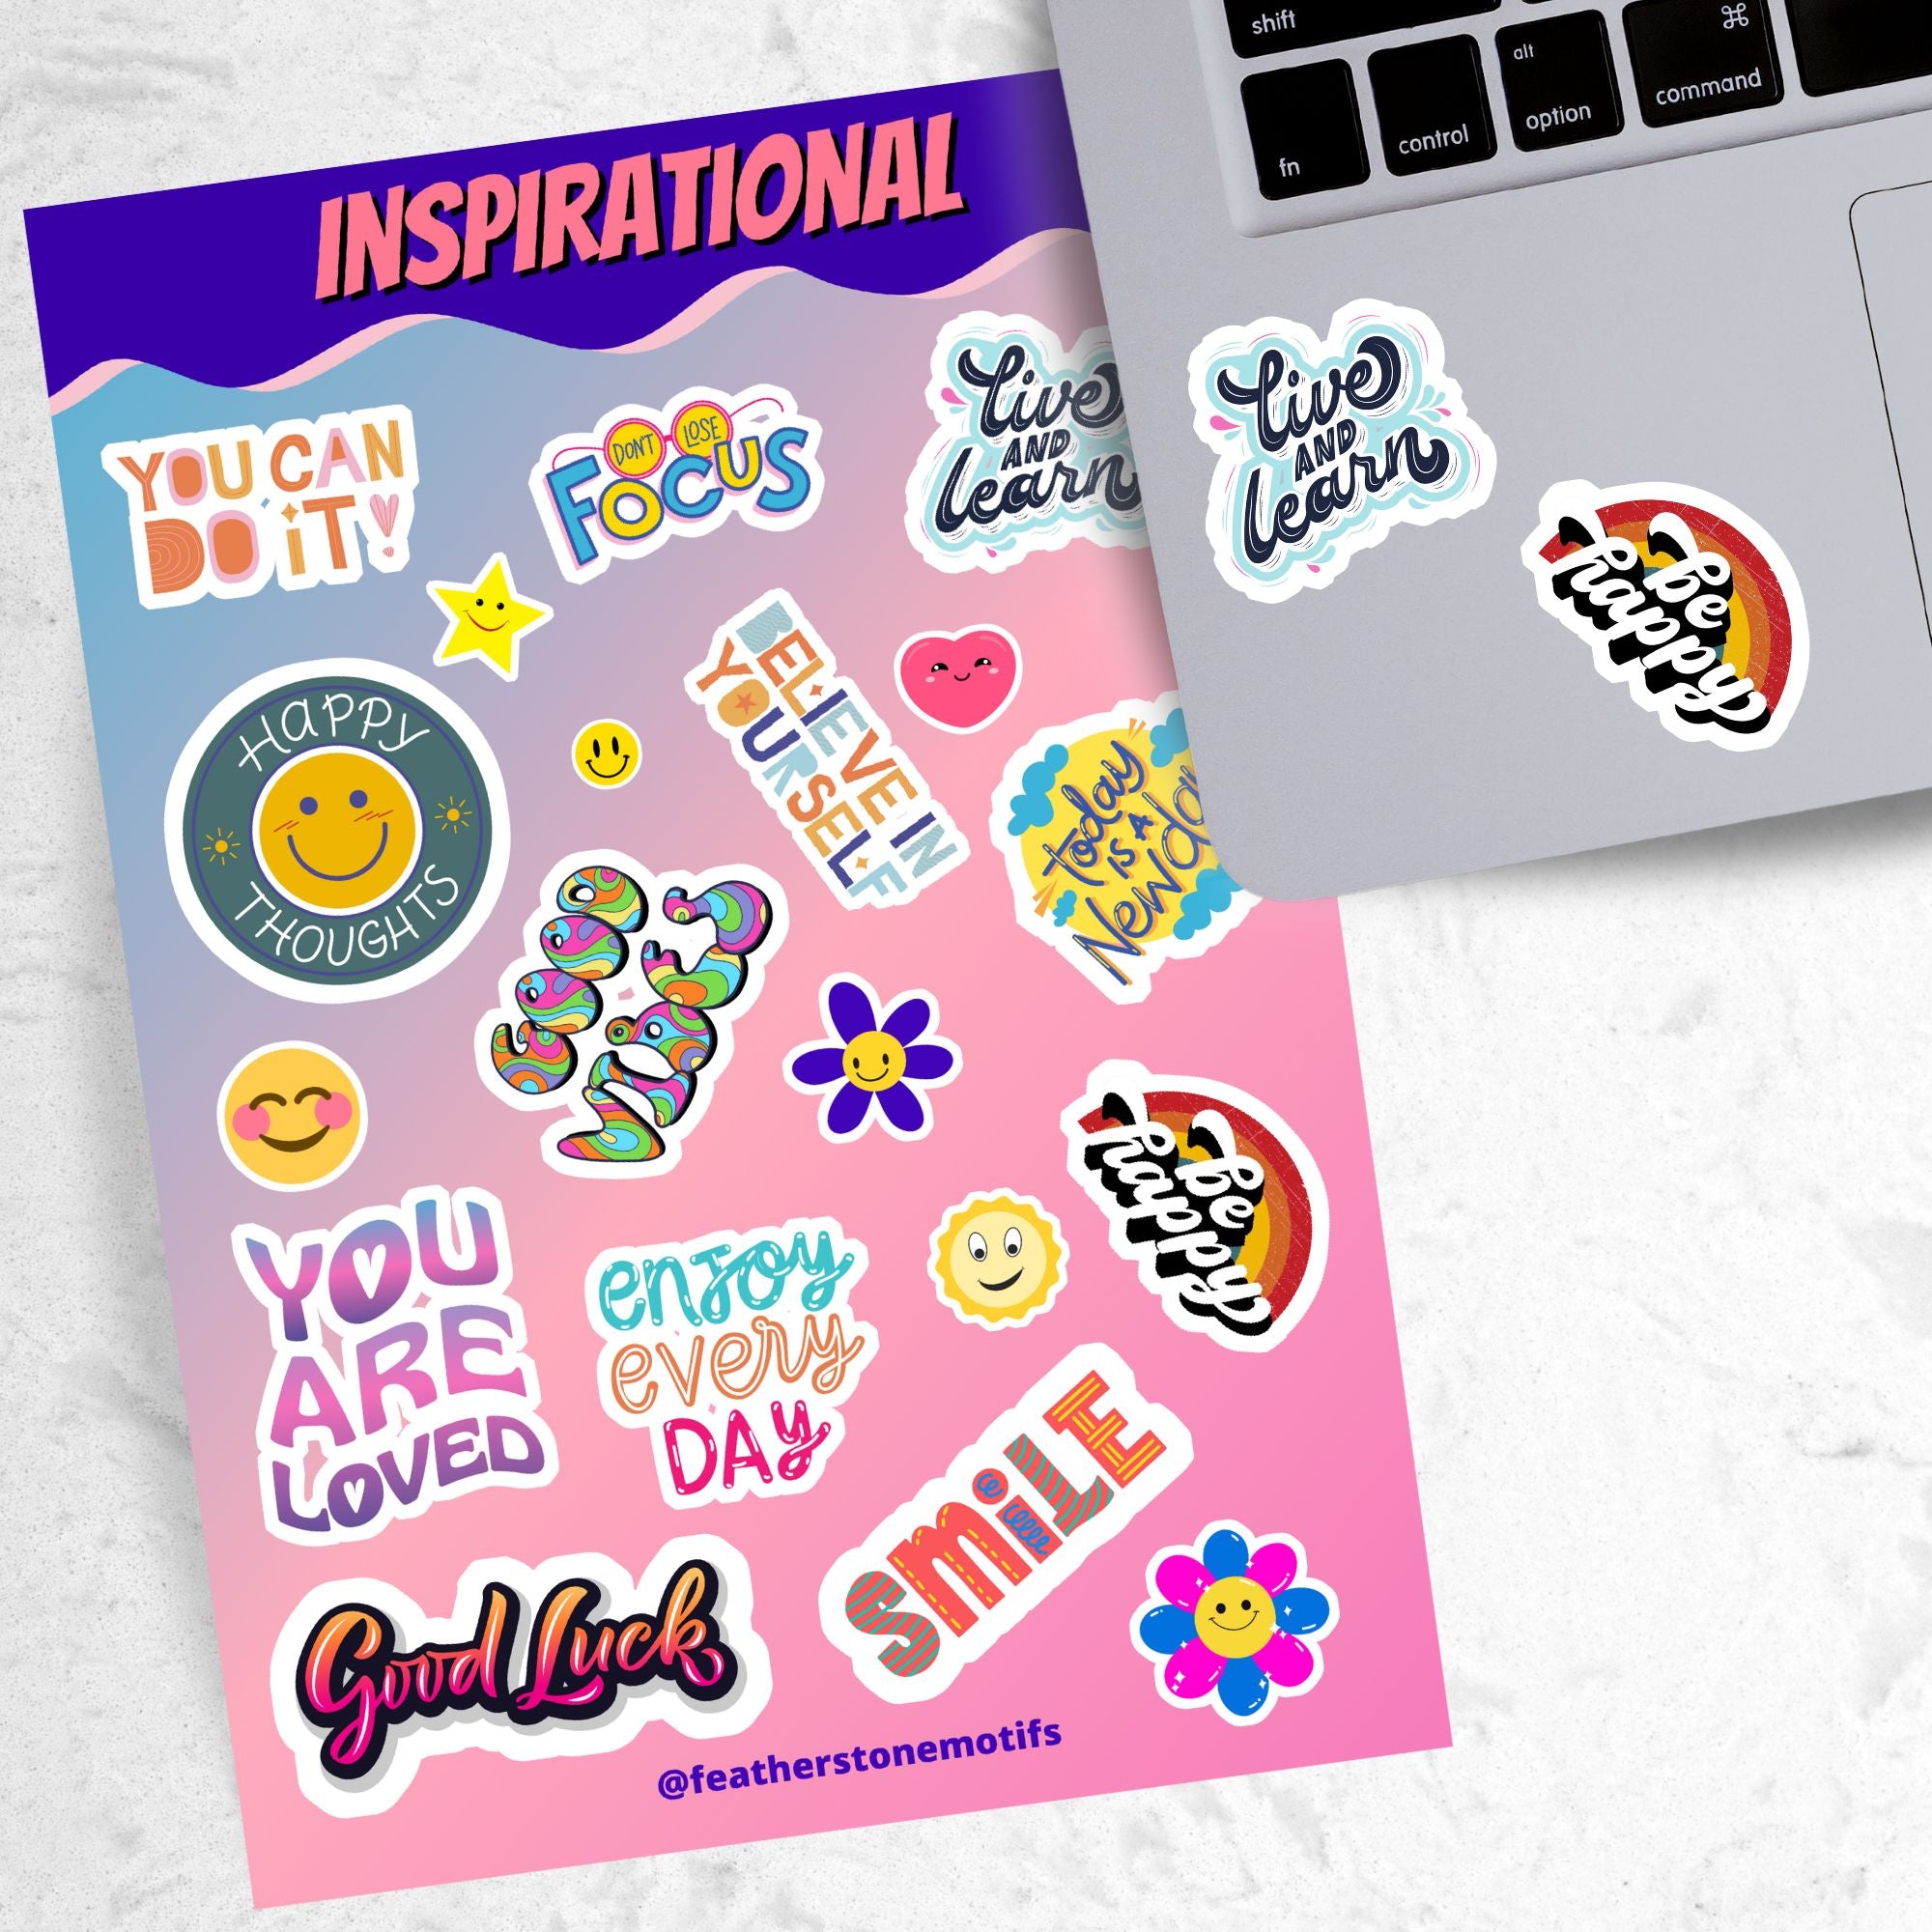 Feel good with these inspirational thoughts as stickers! This sheet has a dozen stickers with inspirational sayings, plus some smaller stickers to help brighten anyone's day. This image shows the sticker sheet next to an open laptop with a "Live and Learn" sticker and a "Be Happy" sticker applied below the keyboard.